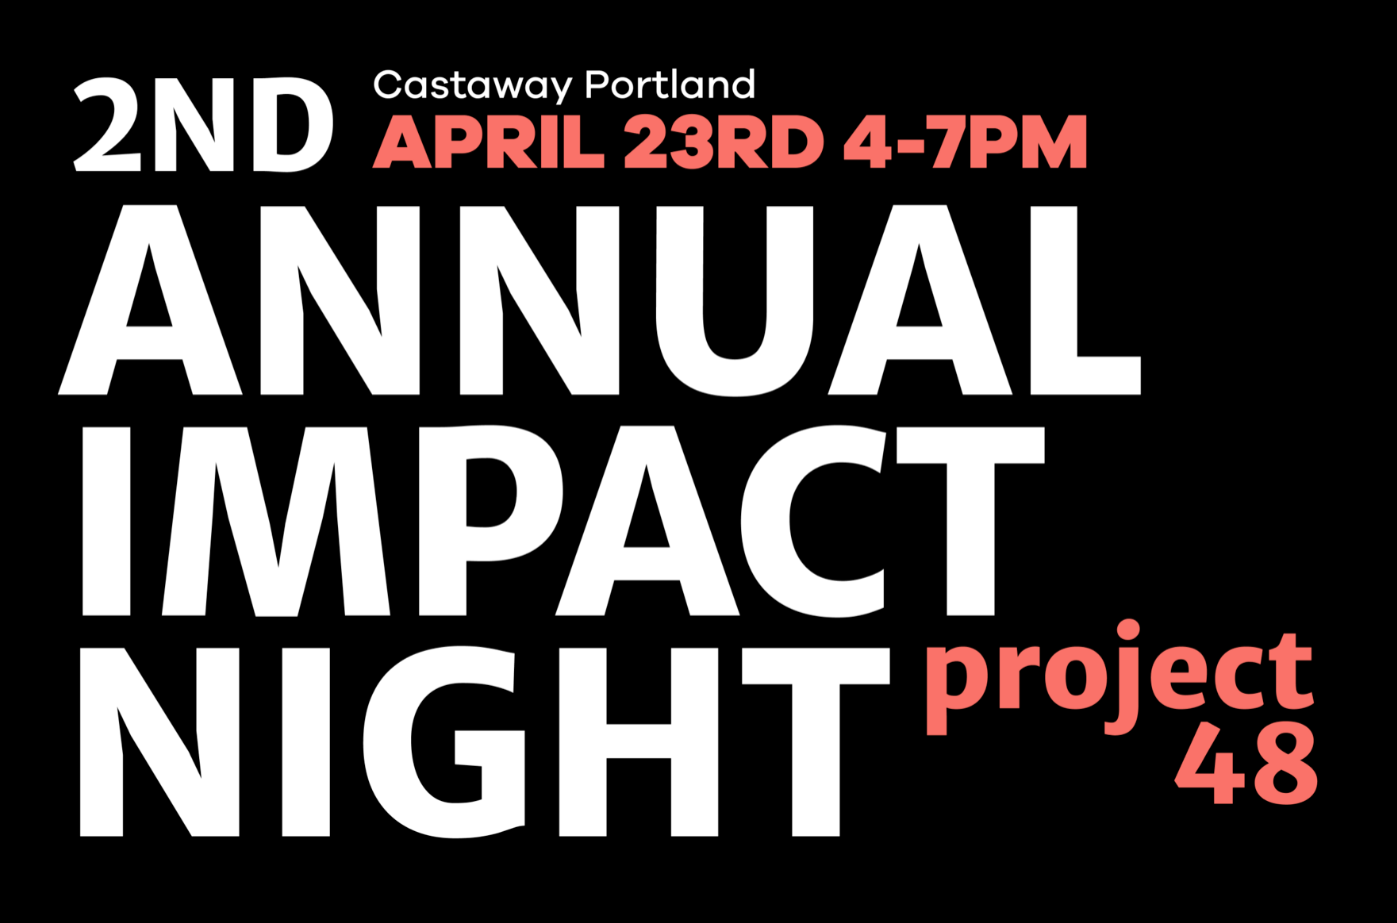 Annual impact night charity event for foster youth